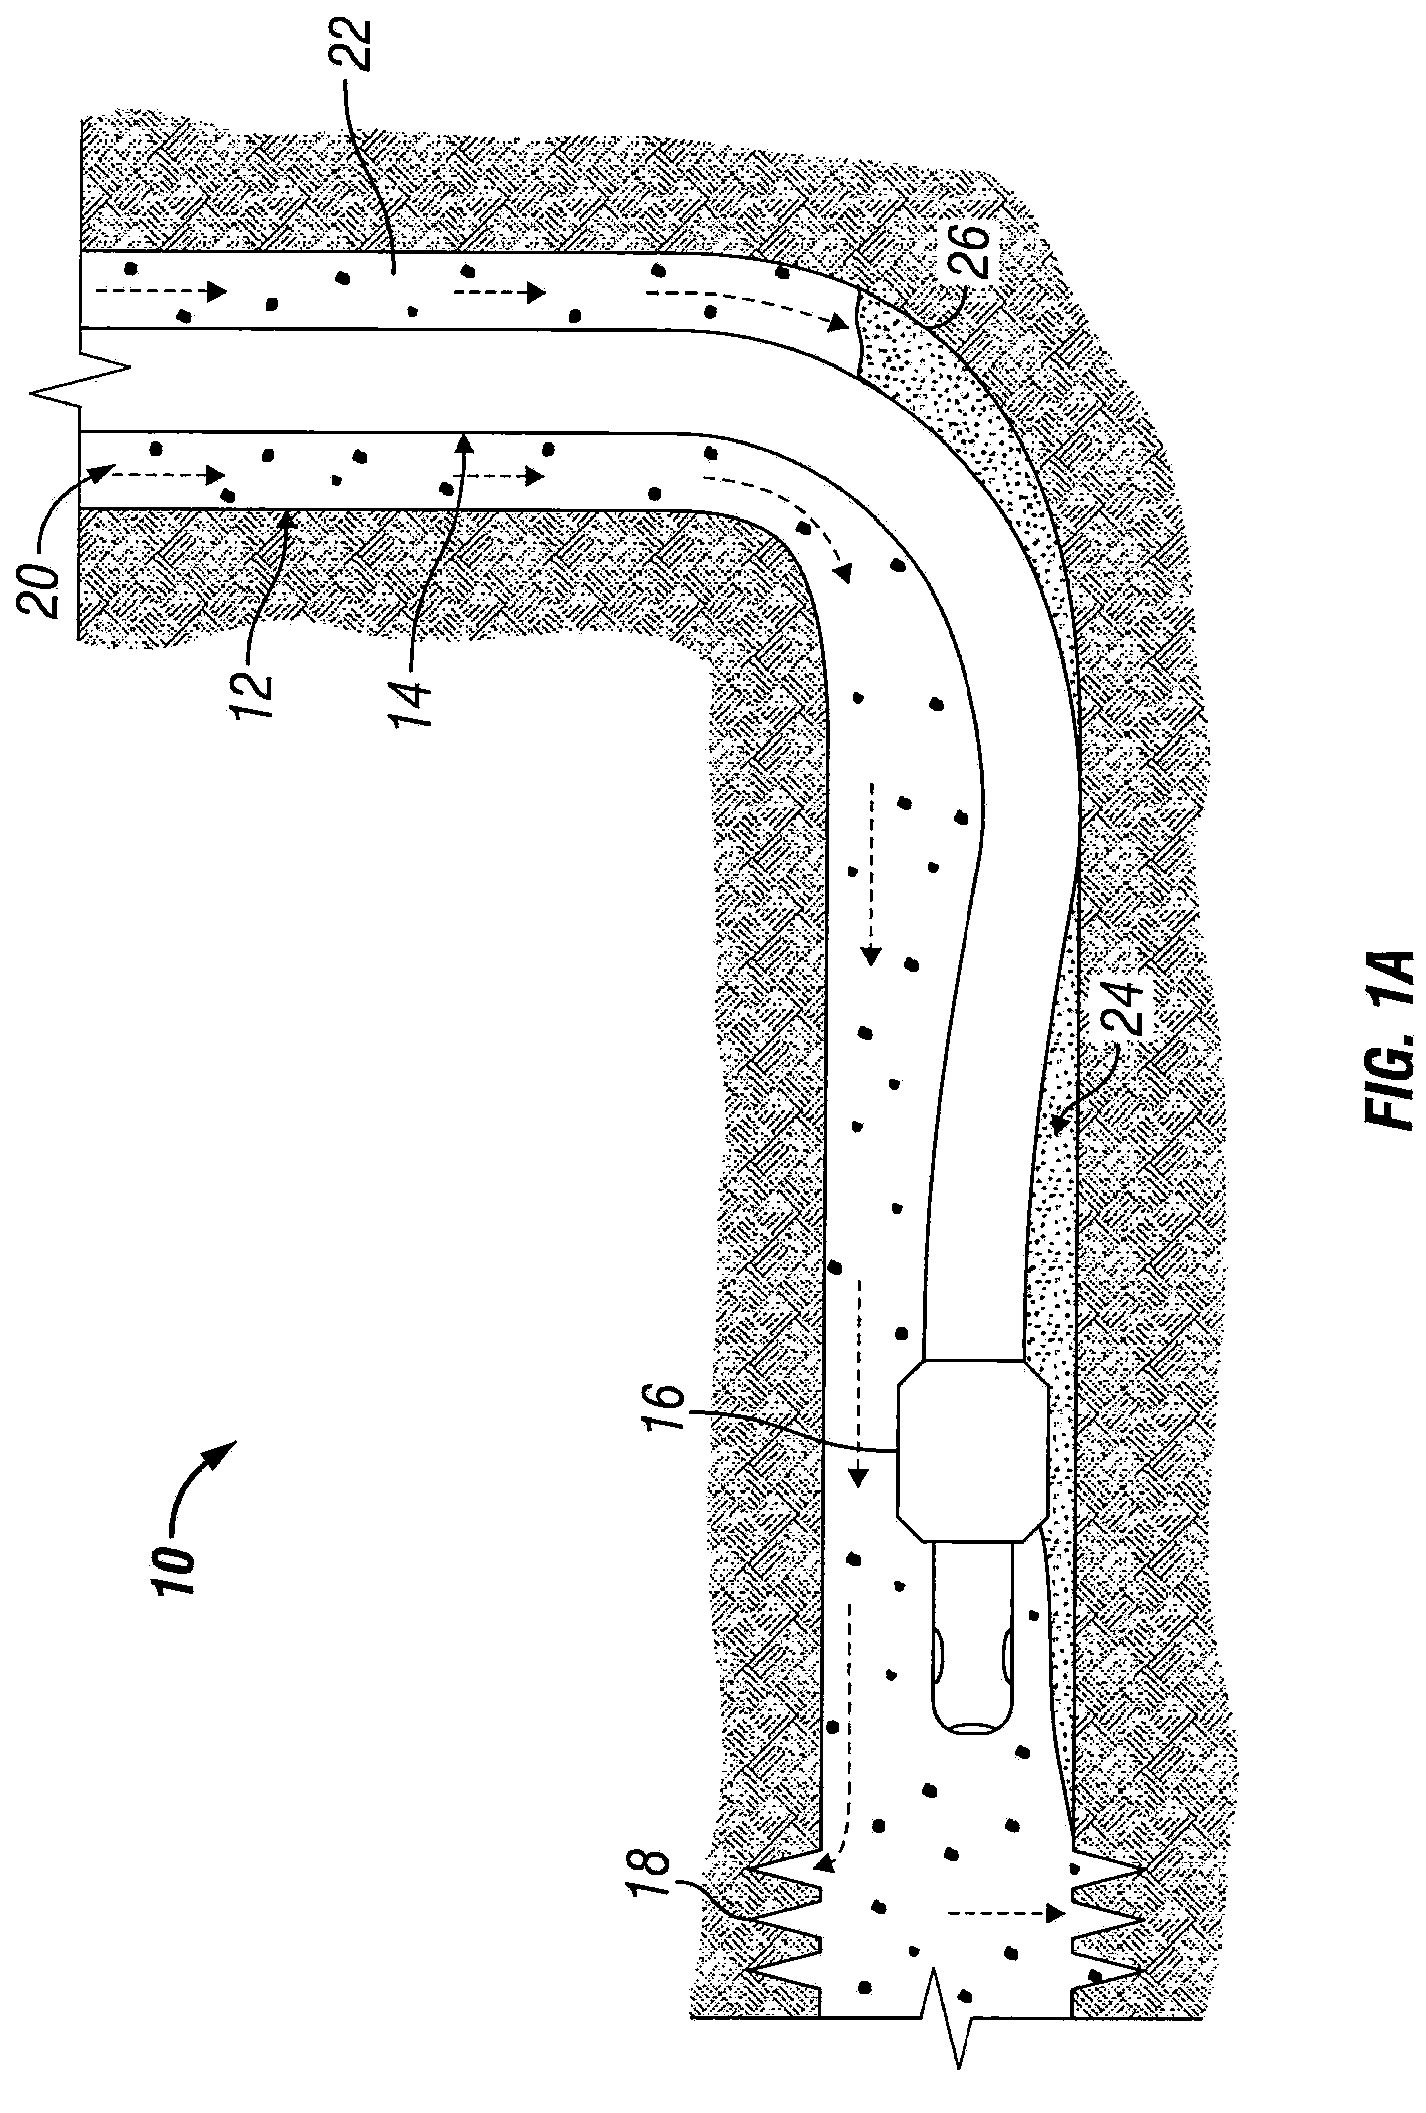 Methods for cleaning out horizontal wellbores using coiled tubing